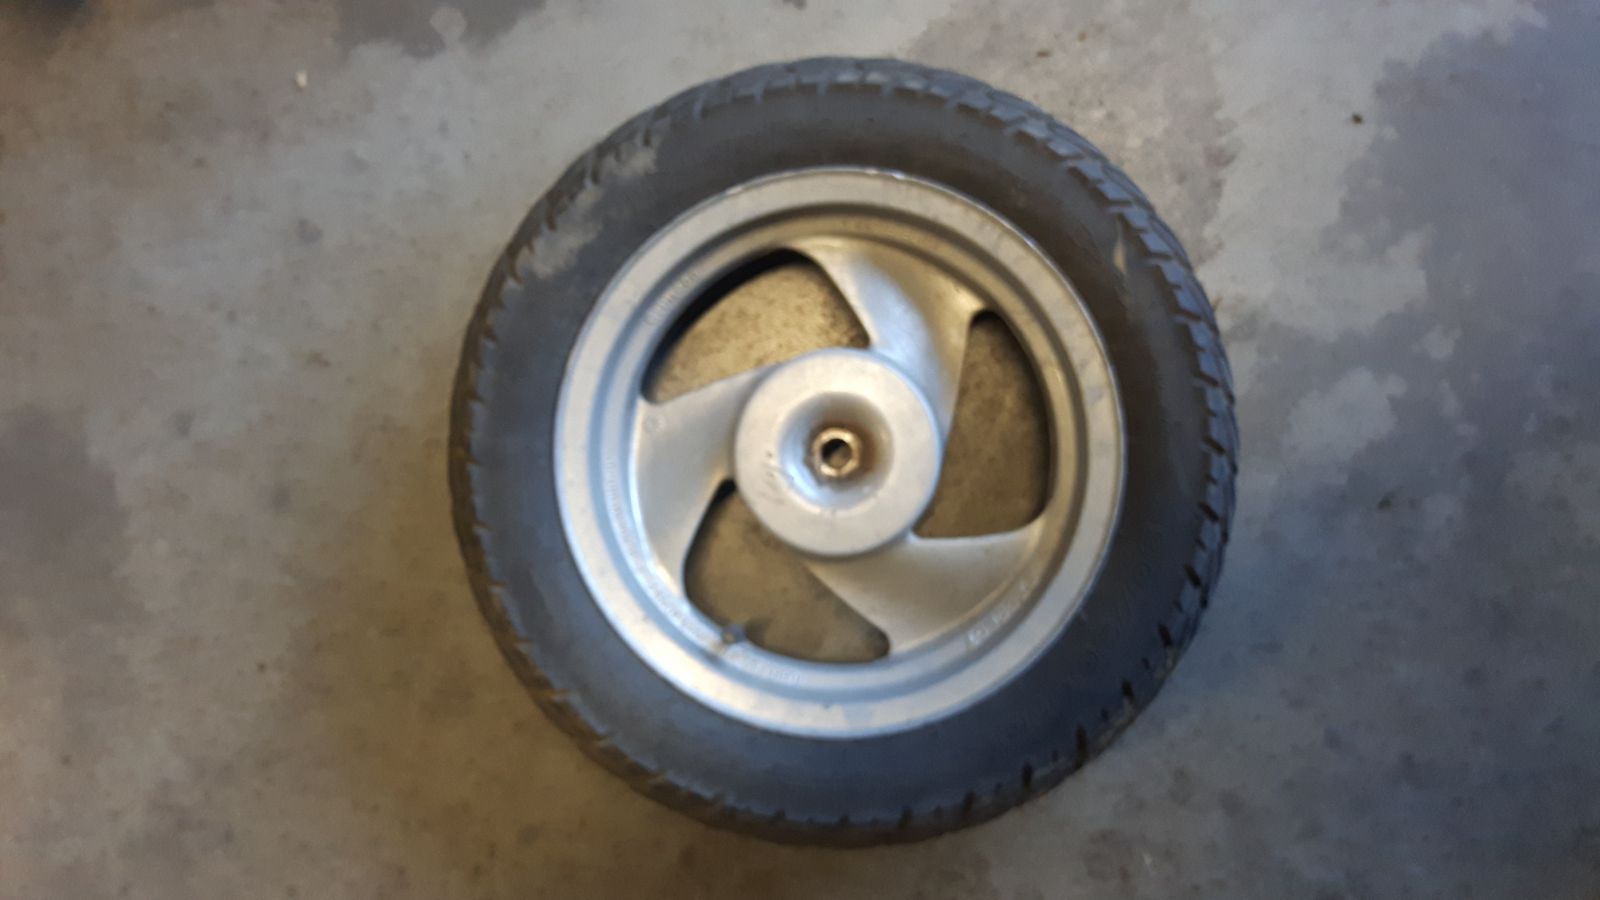 Peugeot Rapido rear wheel and tire